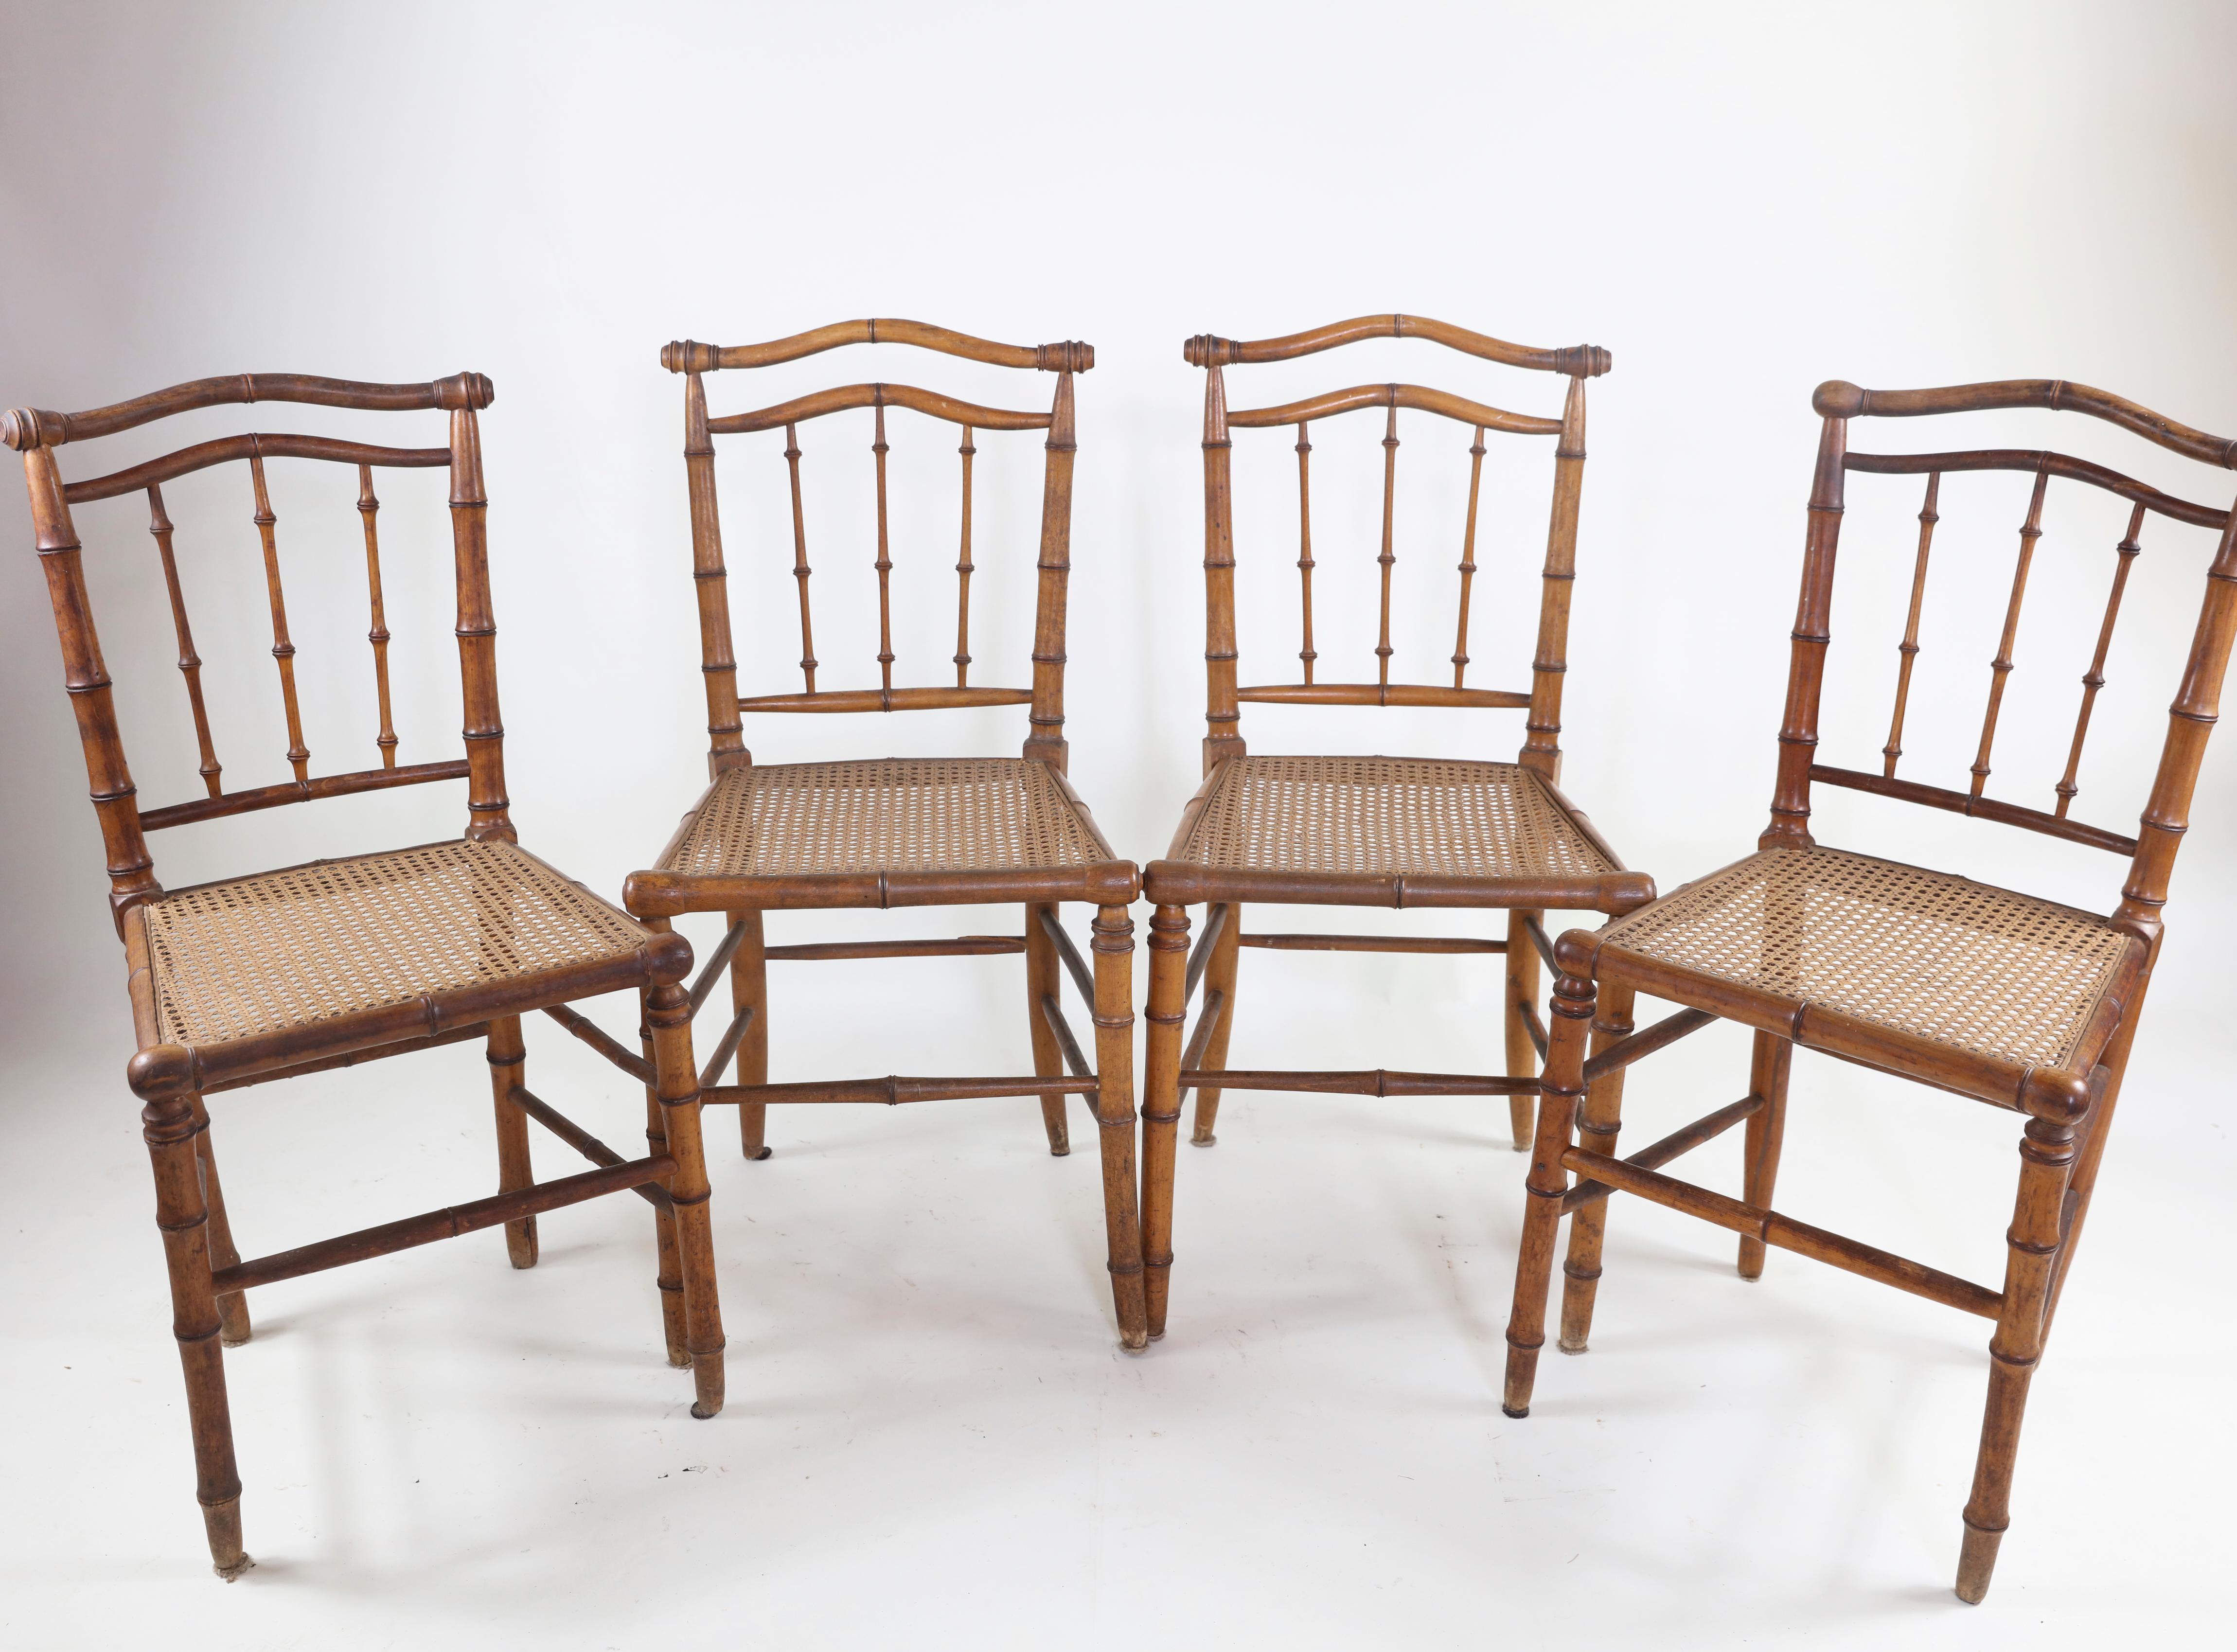 Four antique bamboo chairs